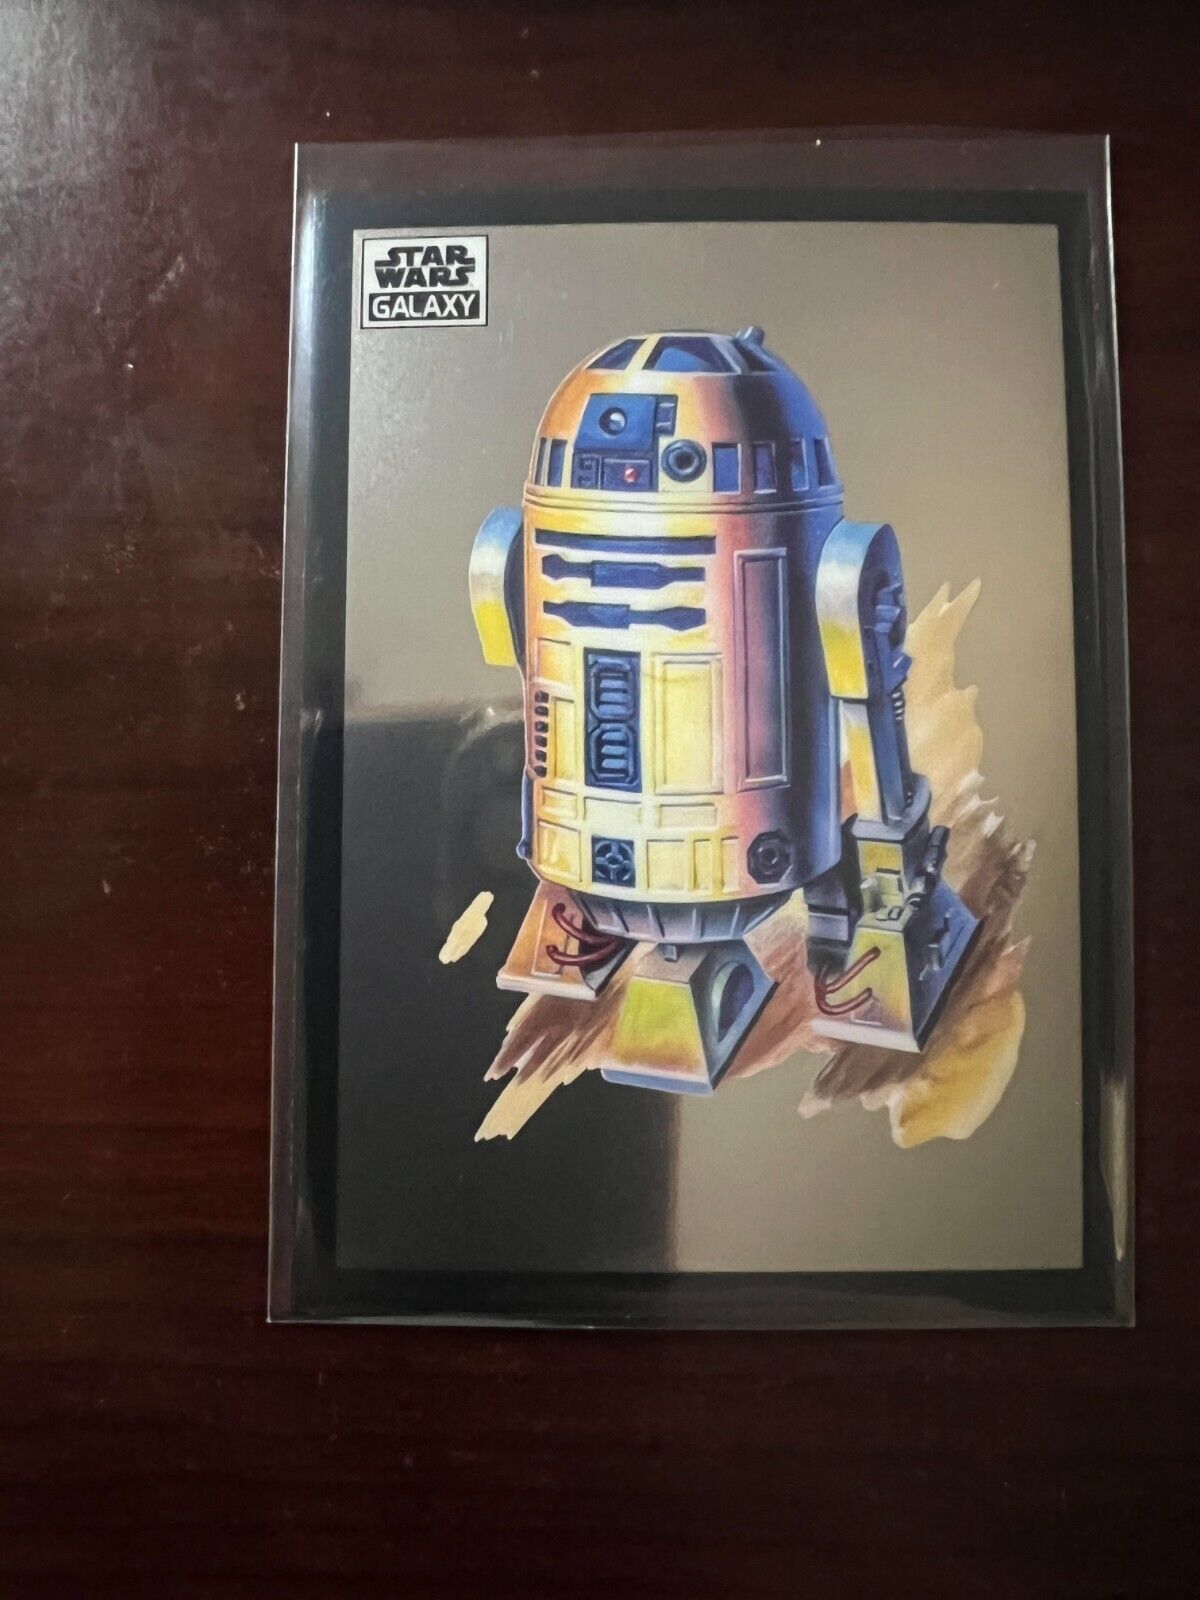 2022 Topps Star Wars Galaxy Chrome BASE - #1-100  - ALL CARDS $0.99